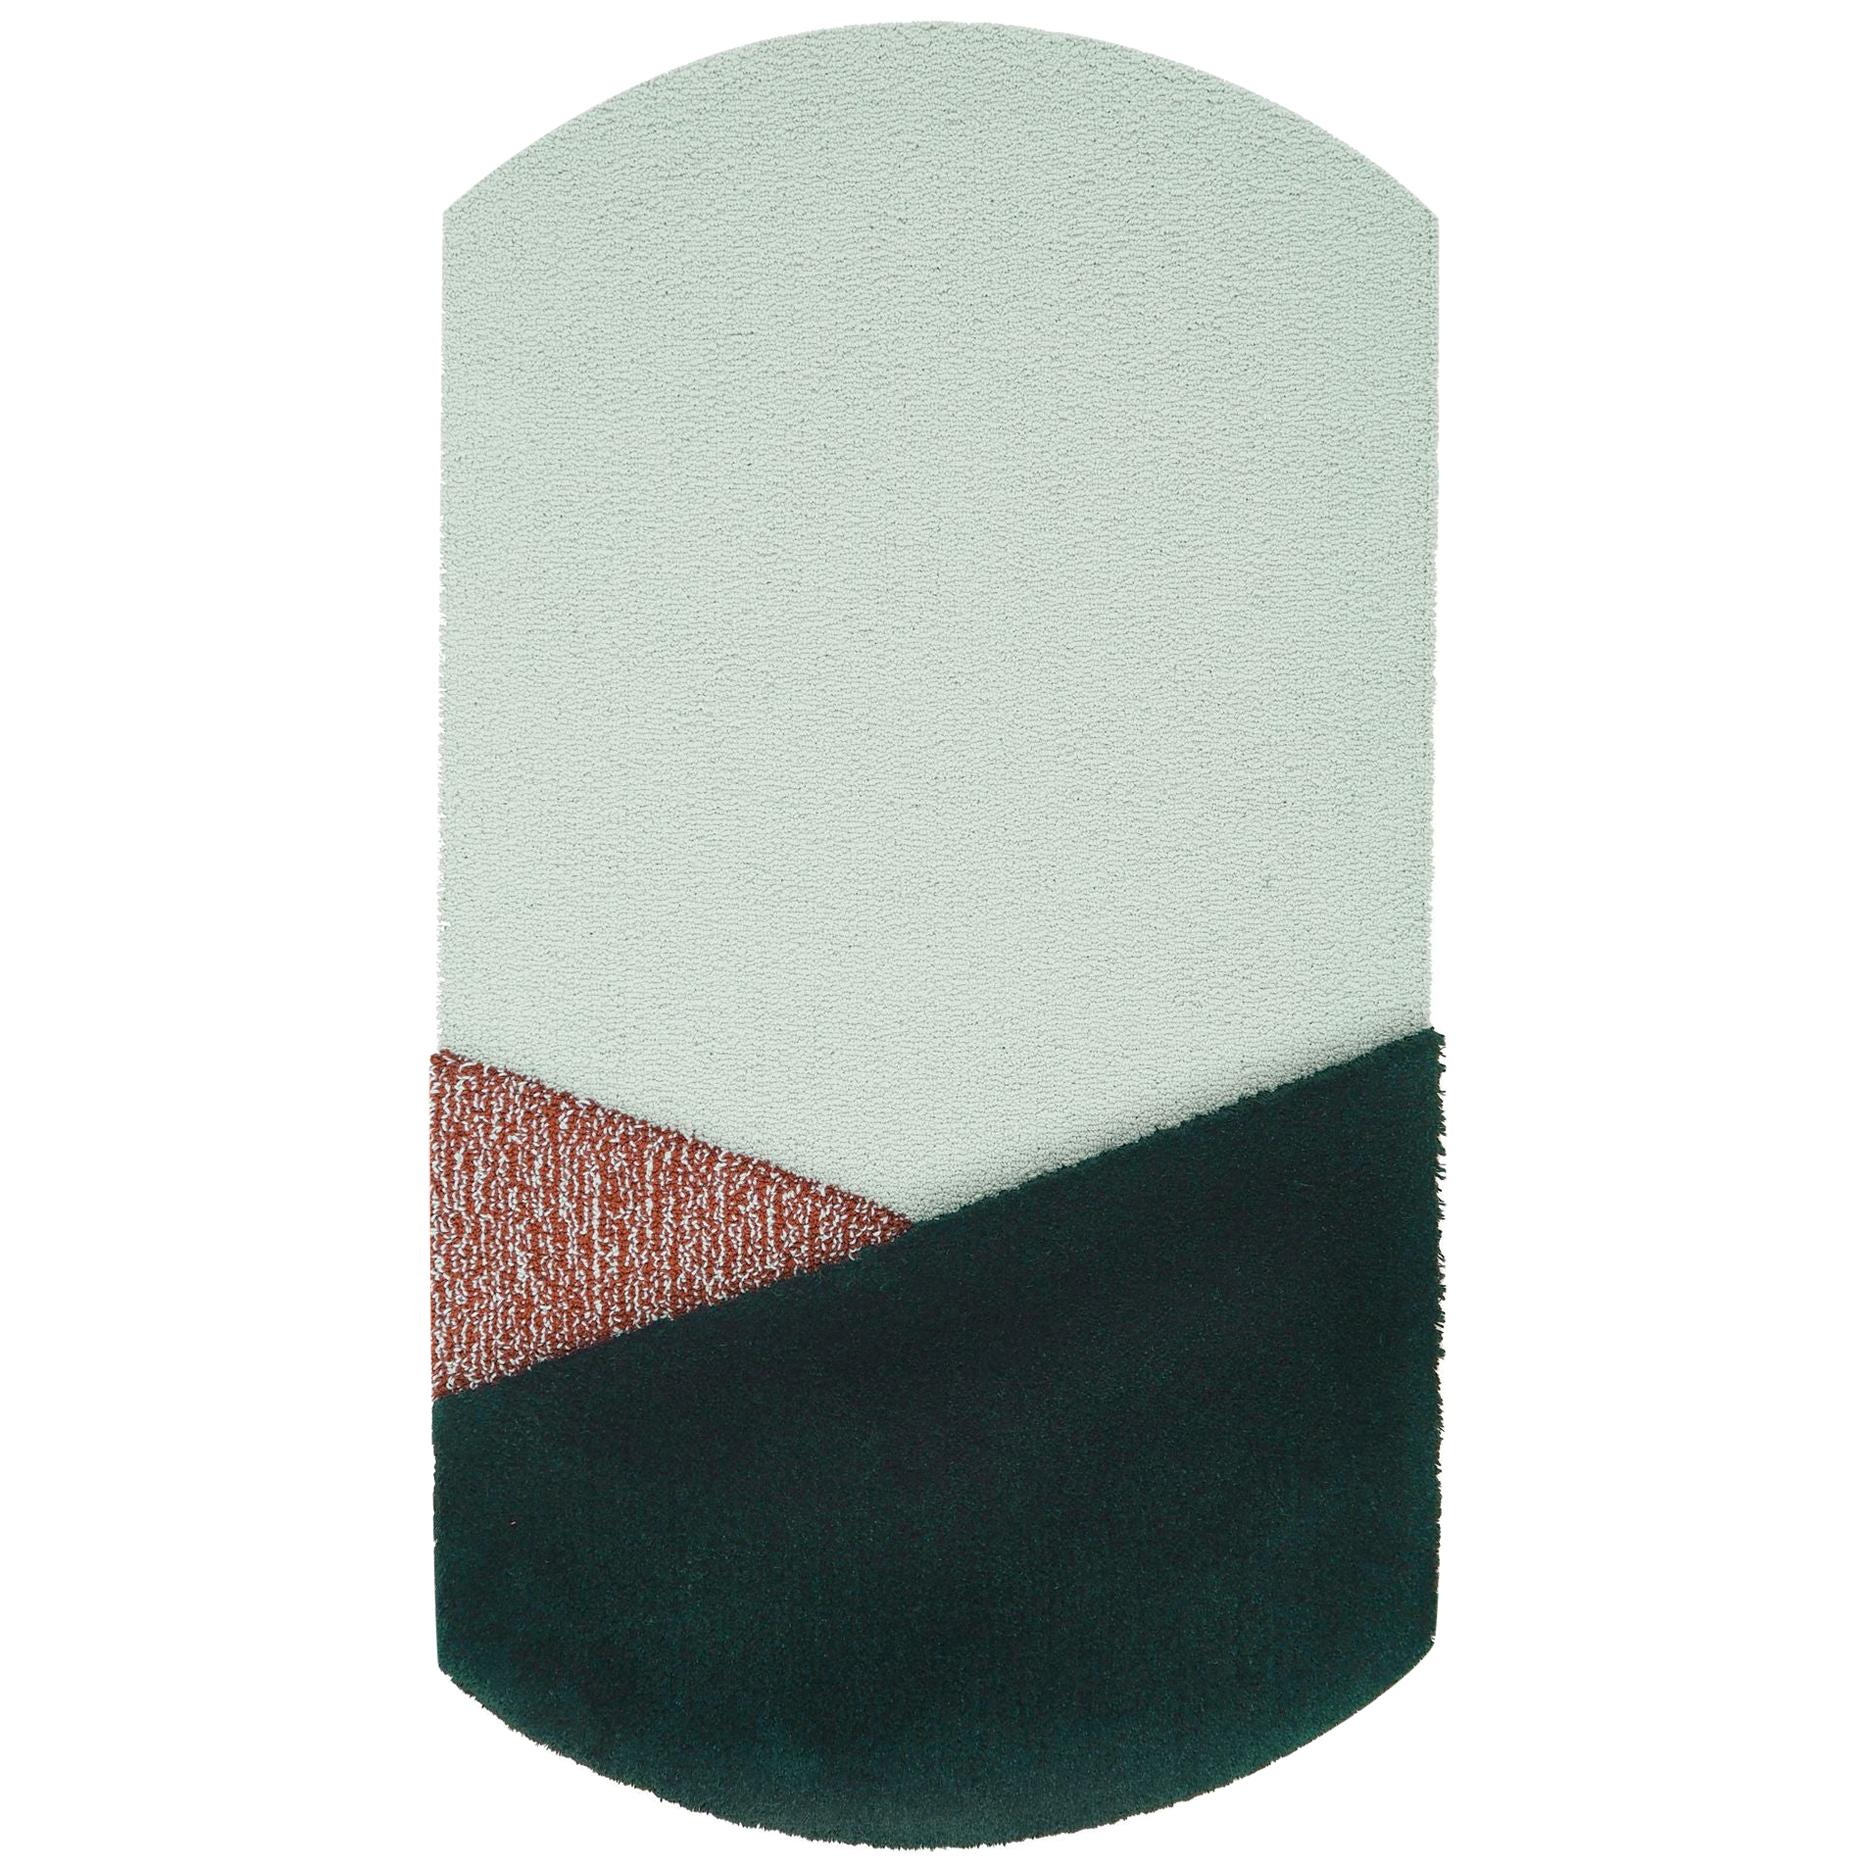 OCI Triptych S, Composition of 3 Rugs 100% Wool /Green and Brick Gray by Portego